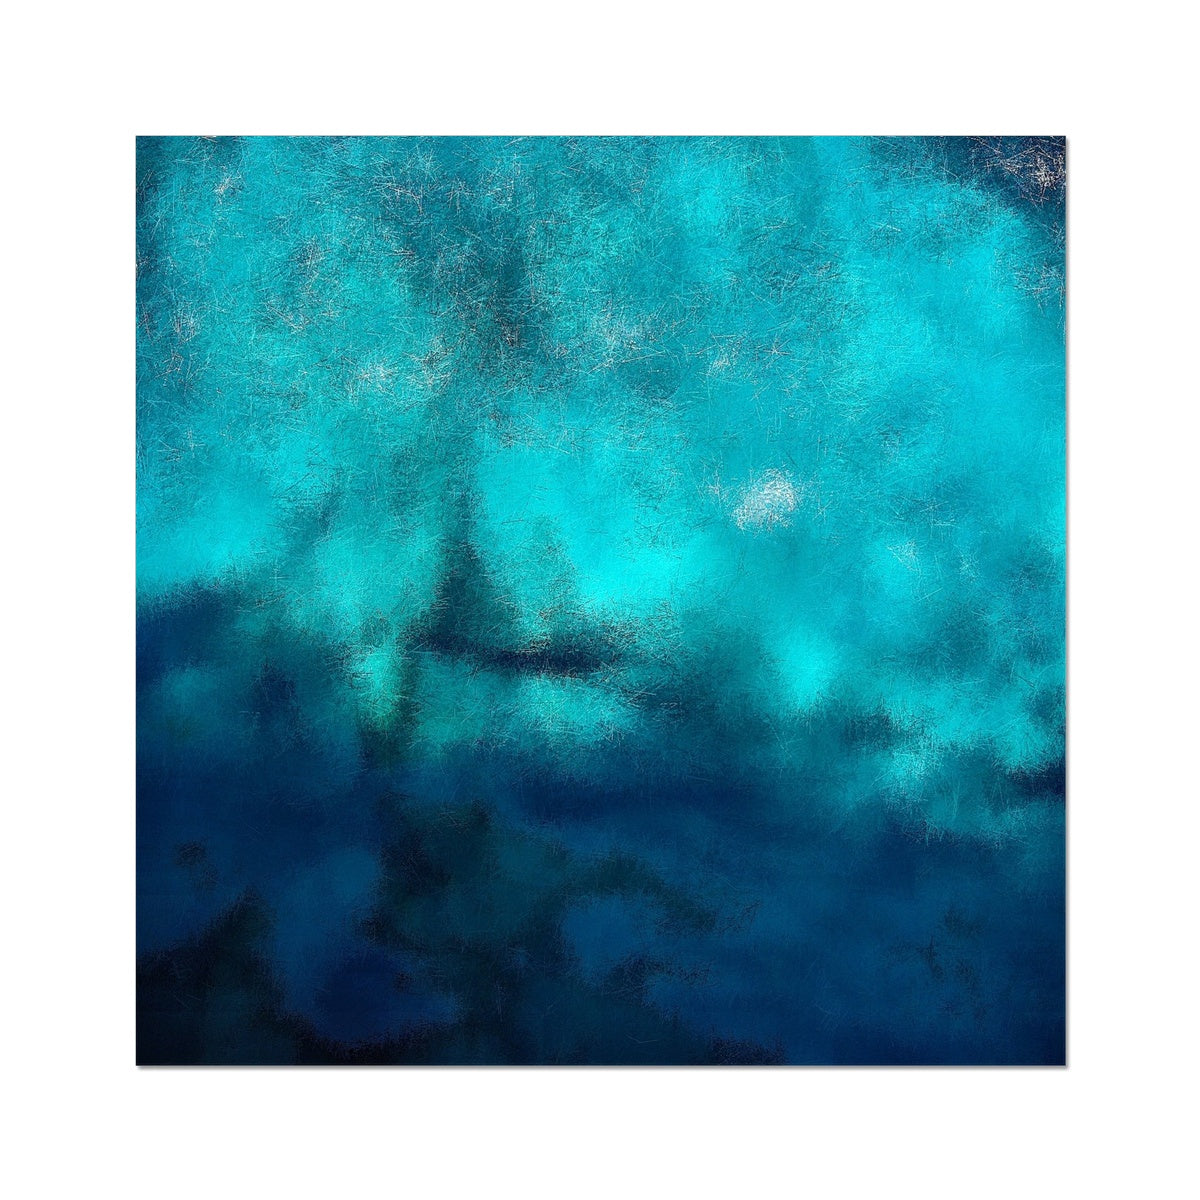 Diving Off Kos Greece Painting | Artist Proof Collector Prints From Scotland-Artist Proof Collector Prints-World Art Gallery-20"x20"-Paintings, Prints, Homeware, Art Gifts From Scotland By Scottish Artist Kevin Hunter